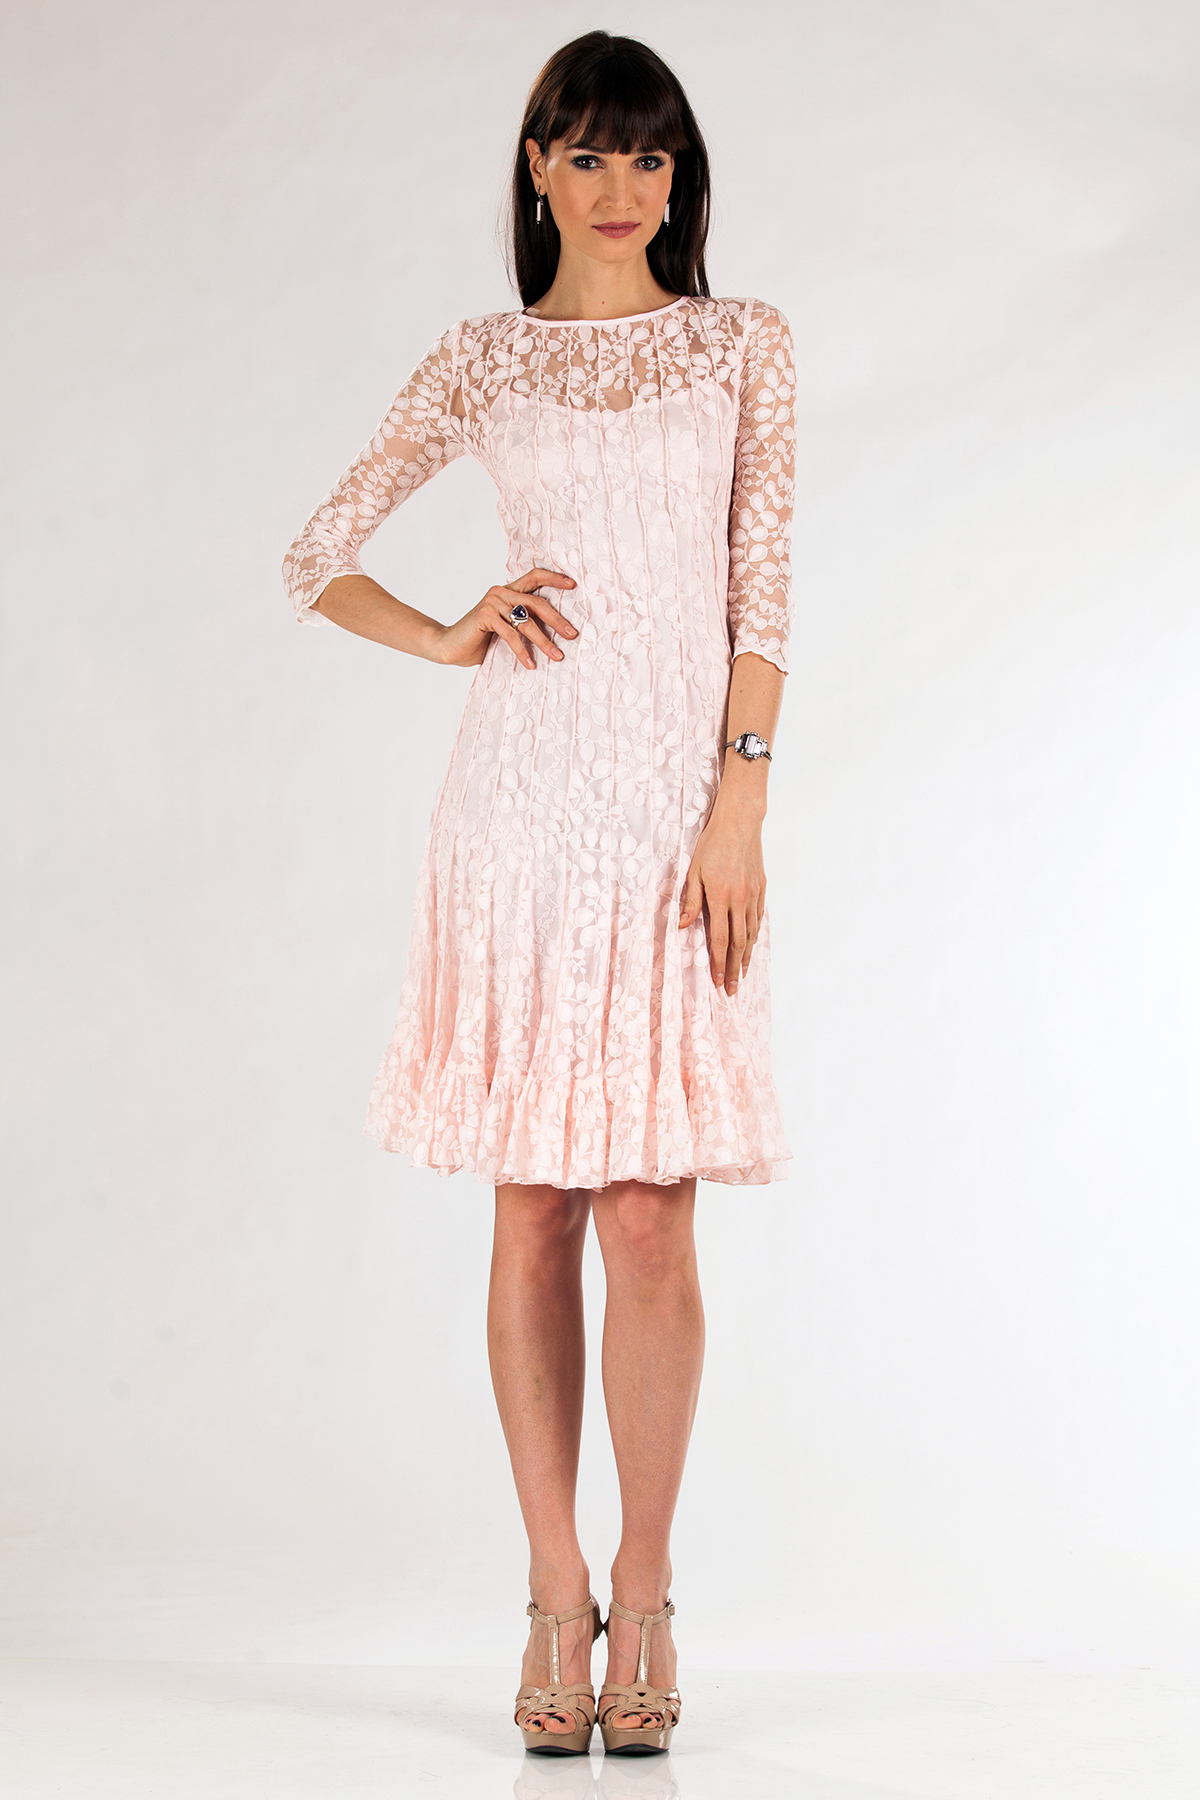 Blush Dress Picture Collection | Dressed Up Girl